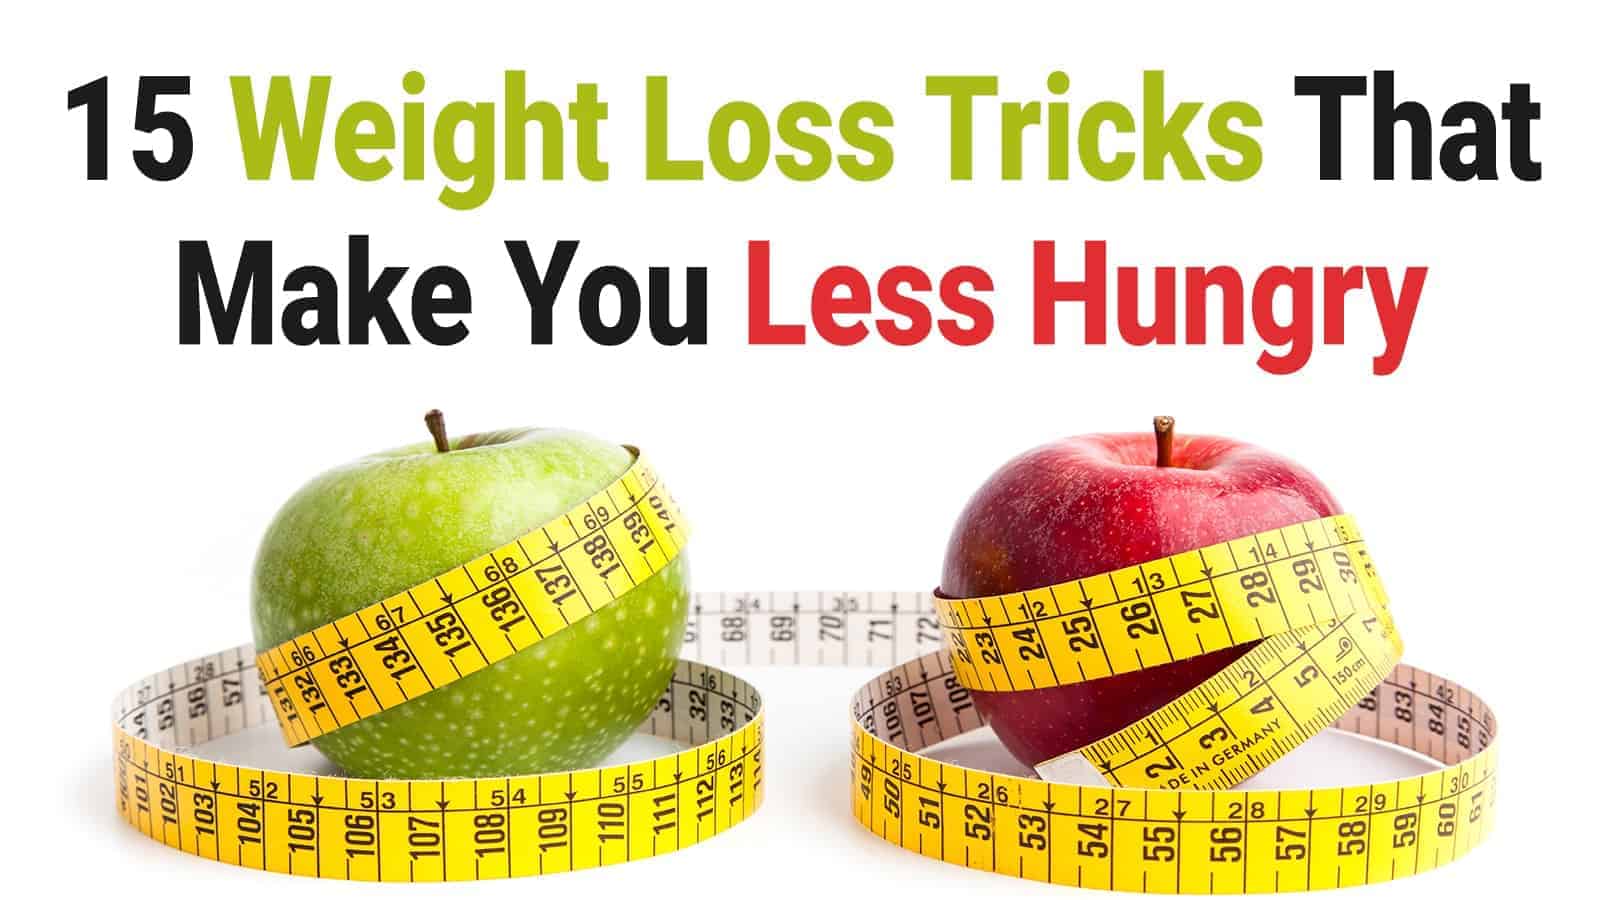 15 Weight Loss Tricks That Make You Less Hungry